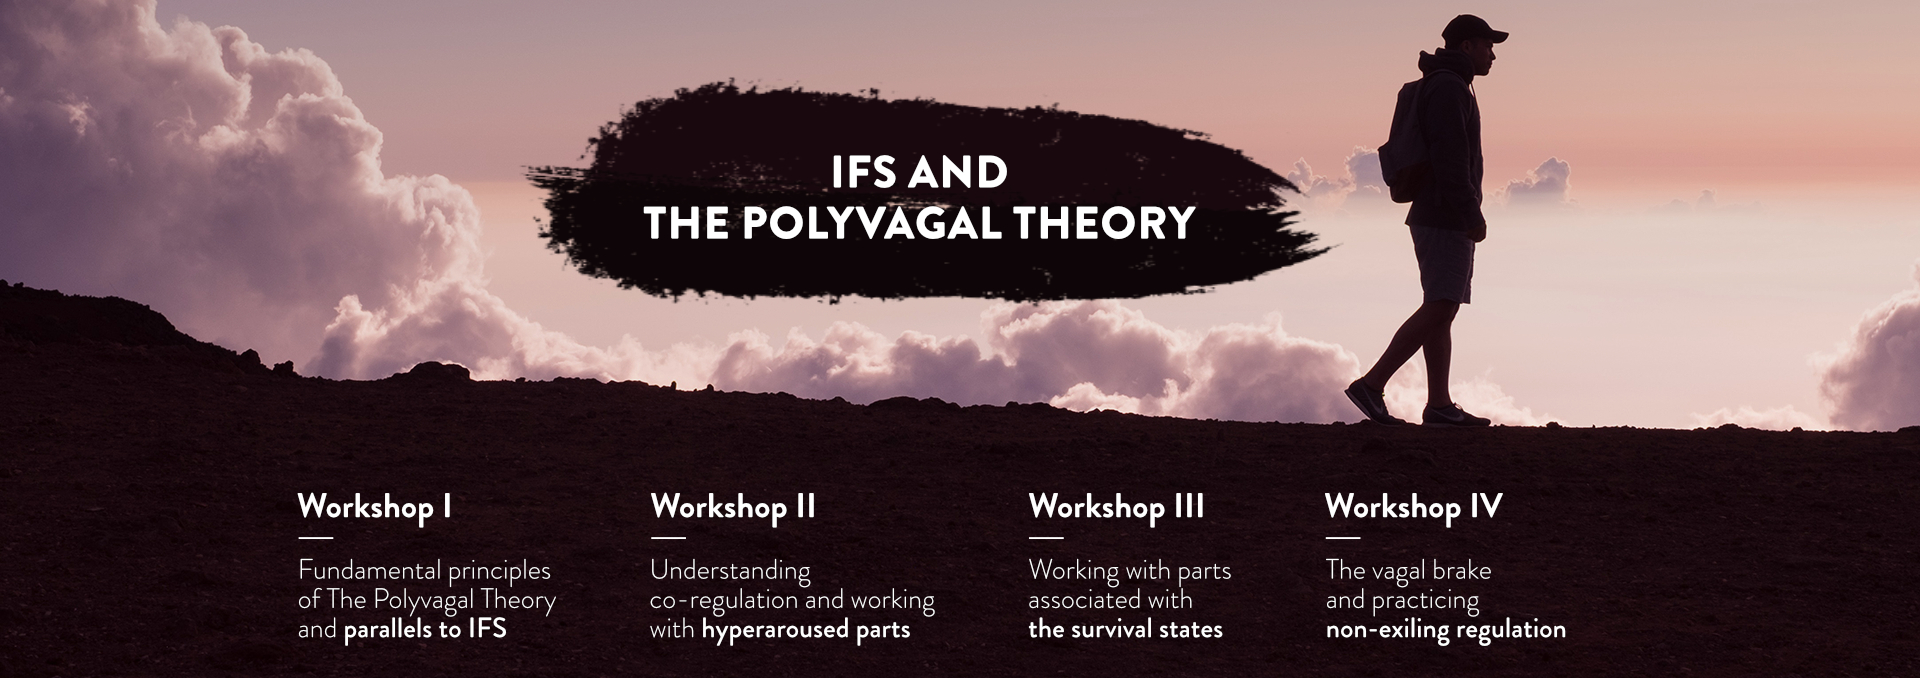 IFS and the polyvagal theory LP 21